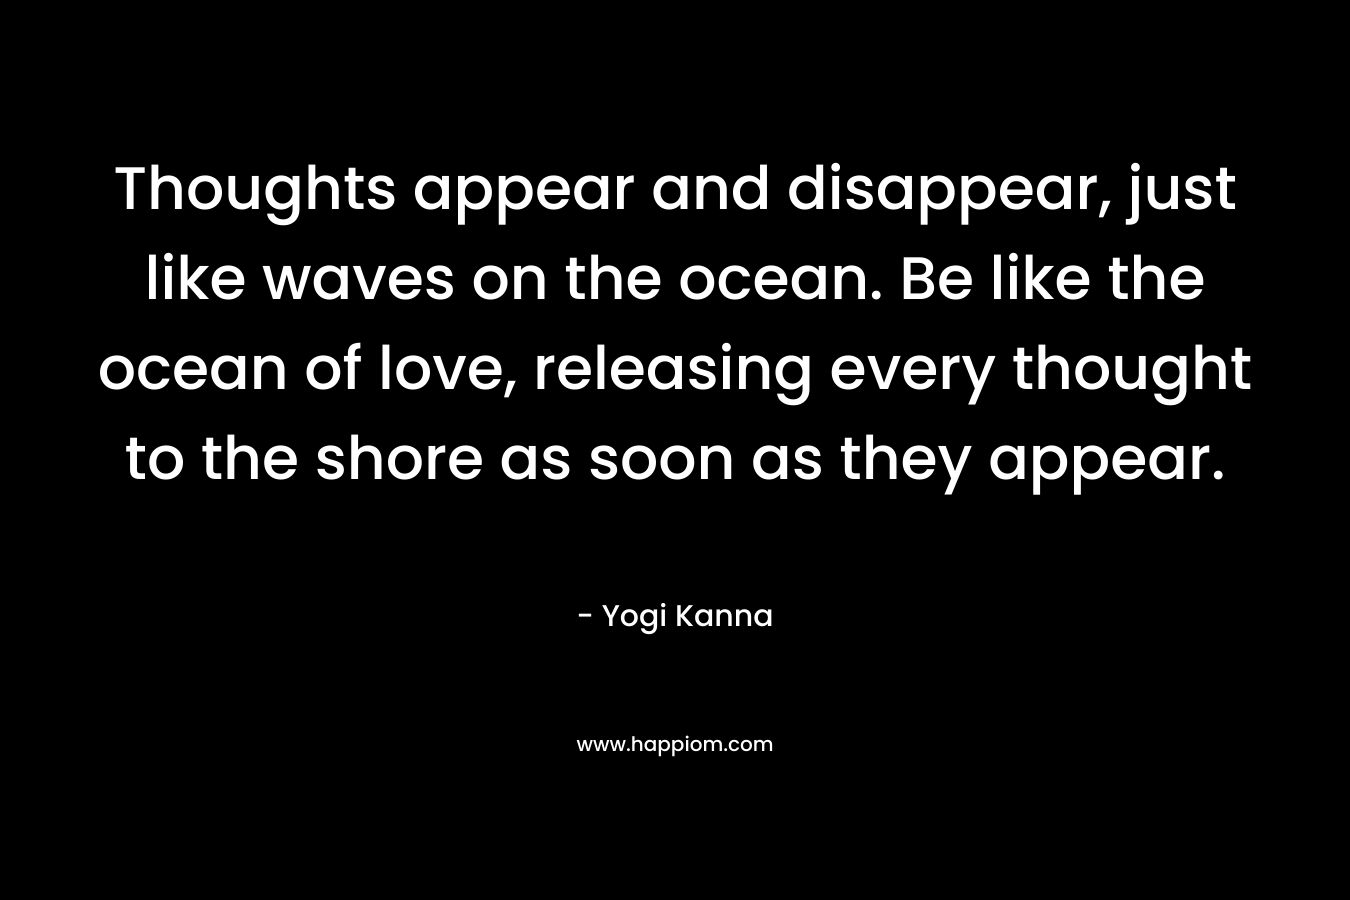 Thoughts appear and disappear, just like waves on the ocean. Be like the ocean of love, releasing every thought to the shore as soon as they appear.